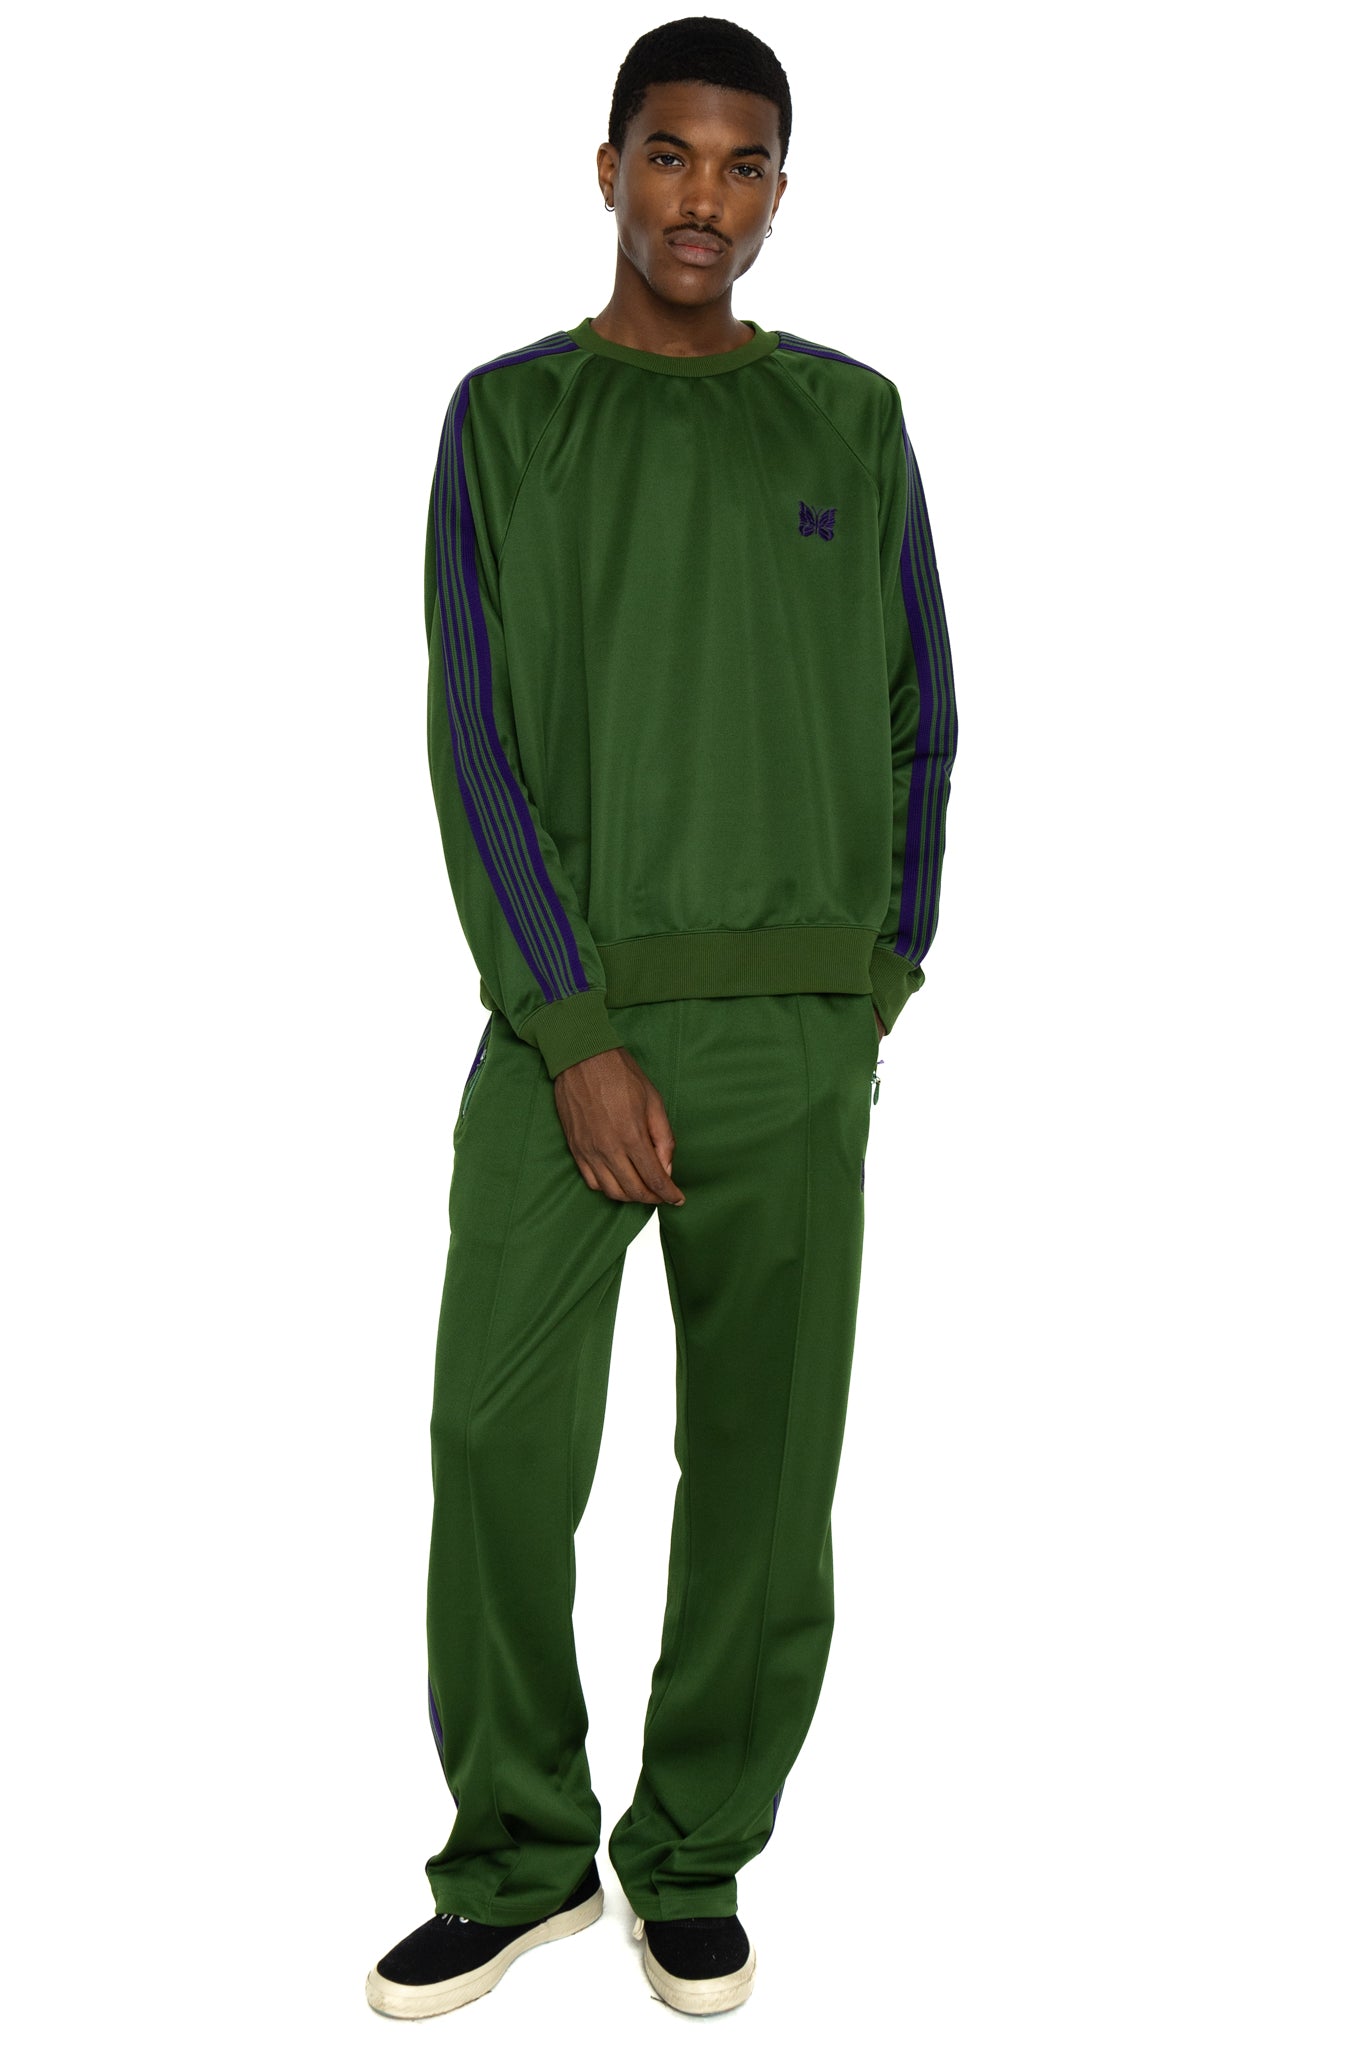 Track Pant Poly Smooth - Ivy Green